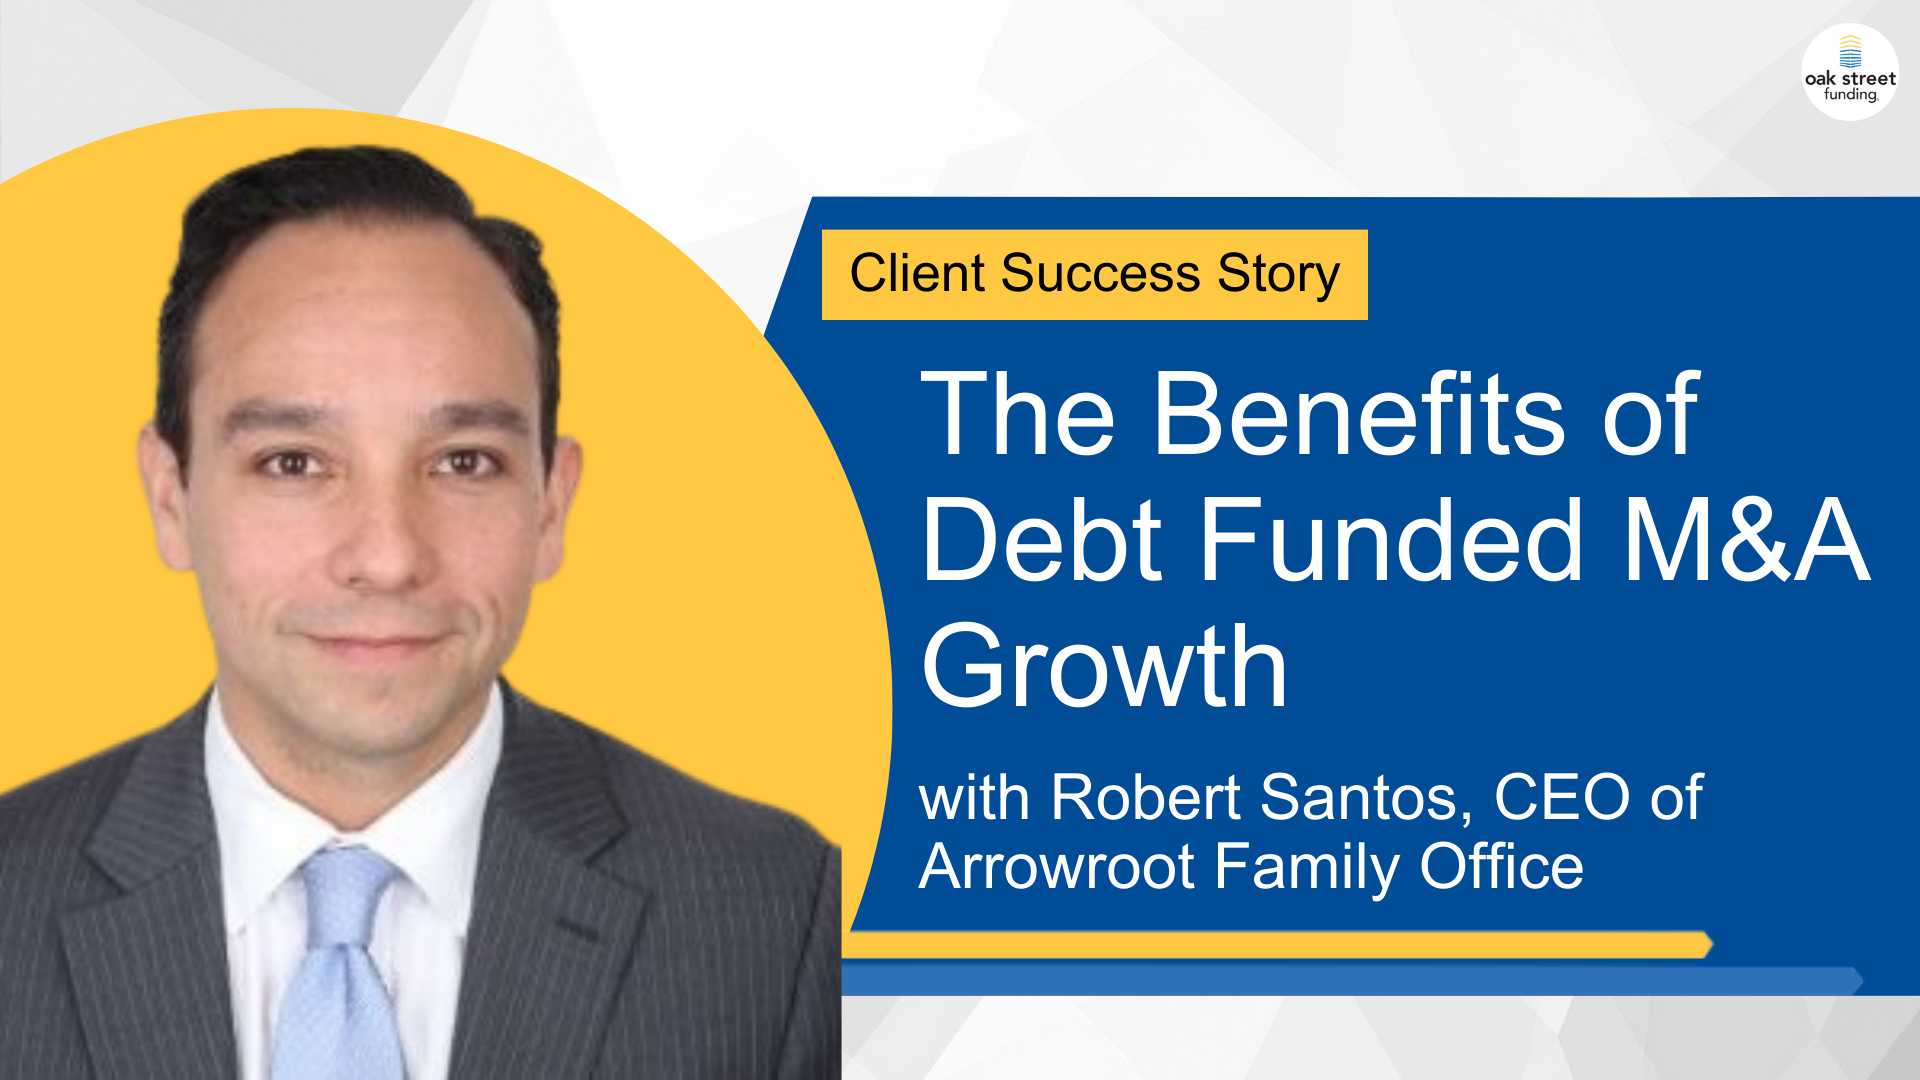 Client Success Story: The Benefits of Debt Funded M&A Growth